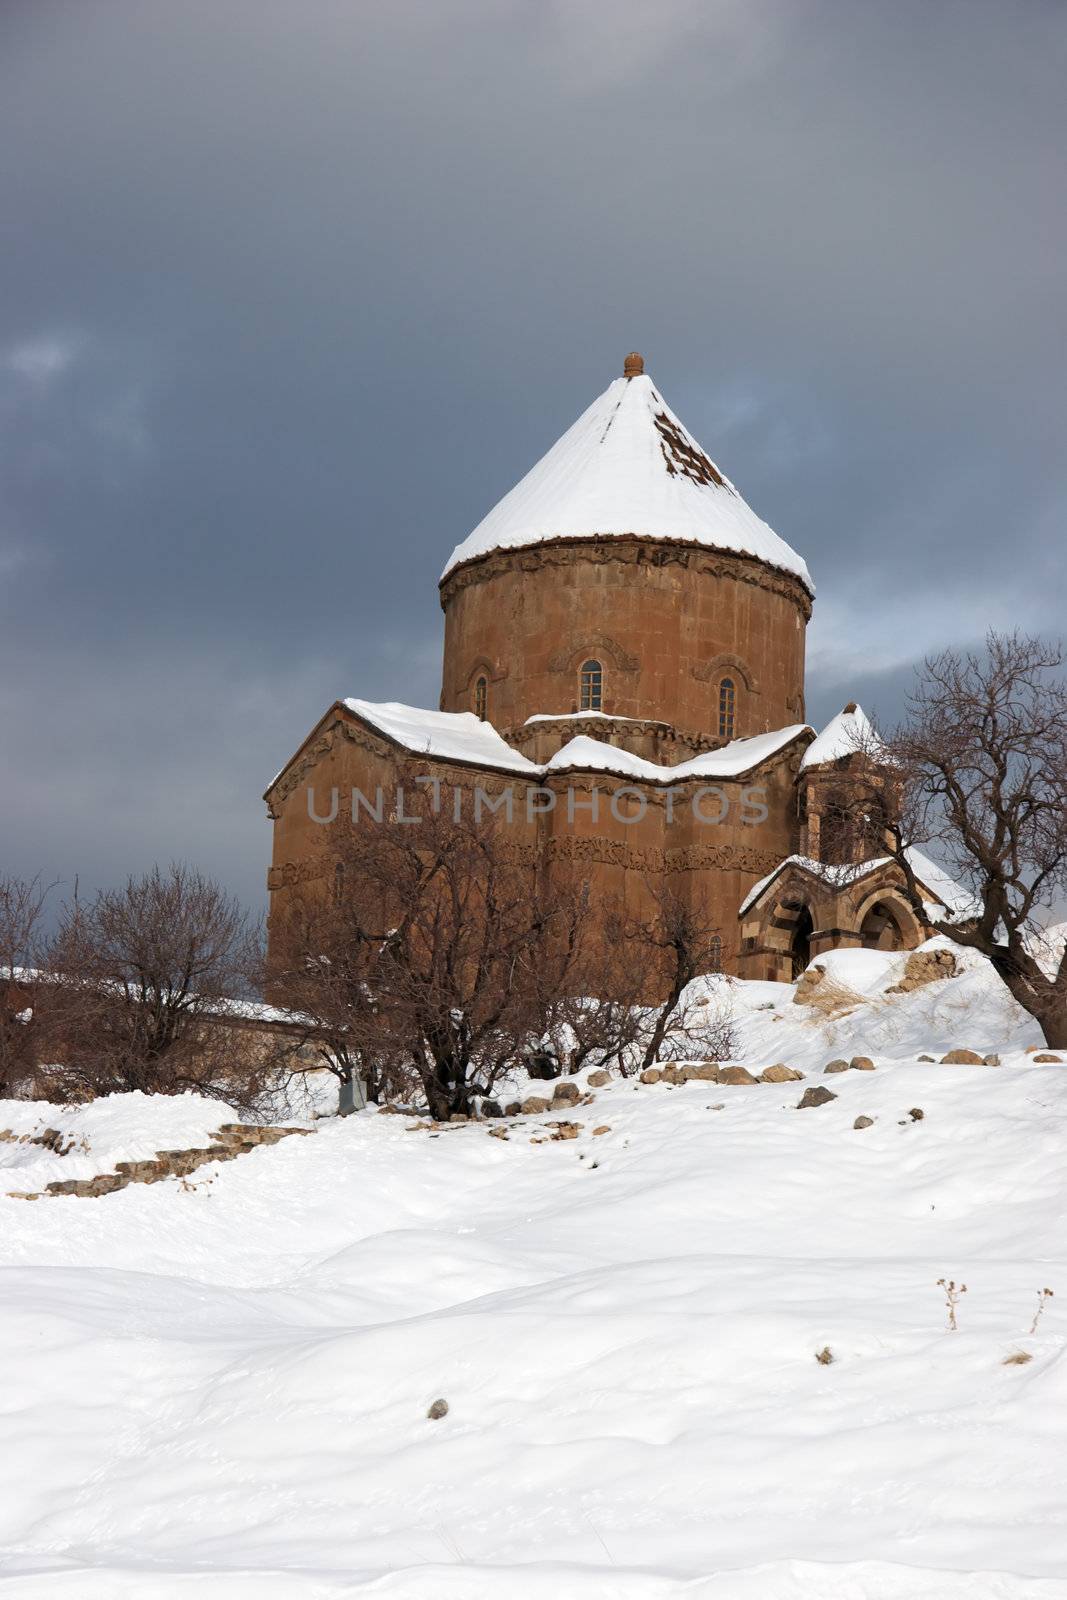 Cathedral Church of the Holy Cross was build at Akdamar island in 10th century when it was the center of armenian kingdom of Vaspurakan. The island is located in Lake Van in eastern Turkey.